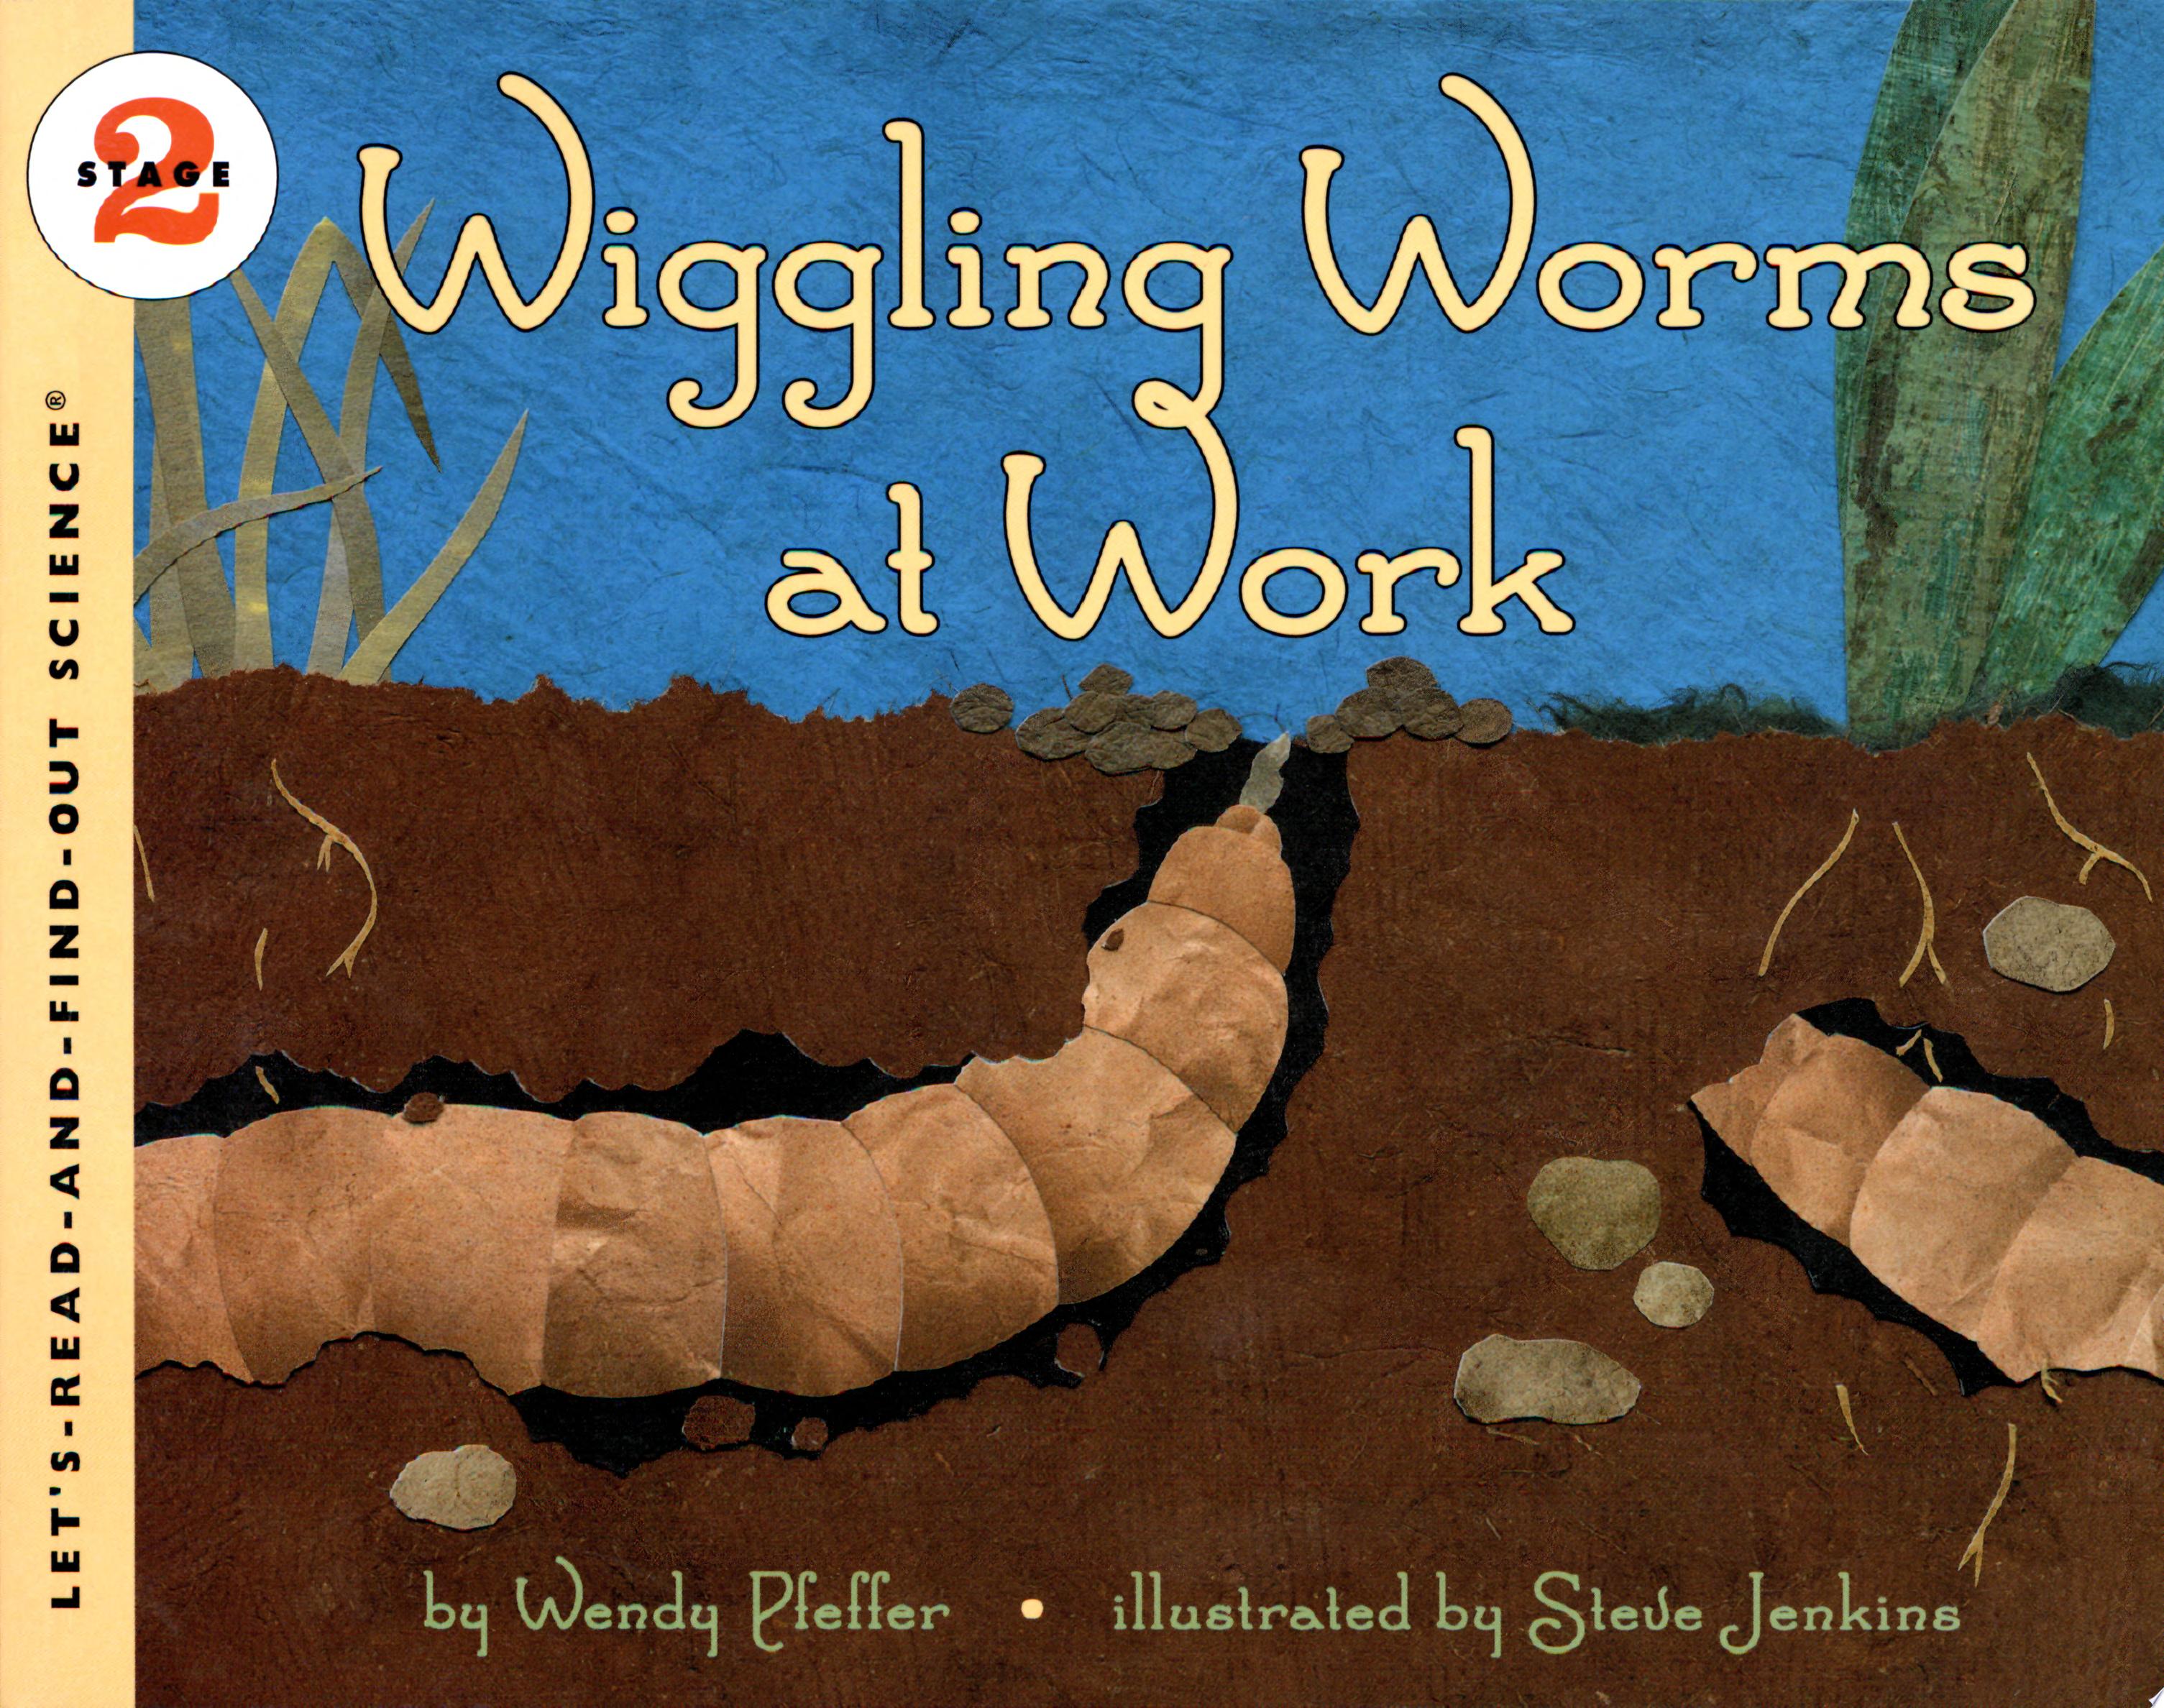 Image for "Wiggling Worms at Work"